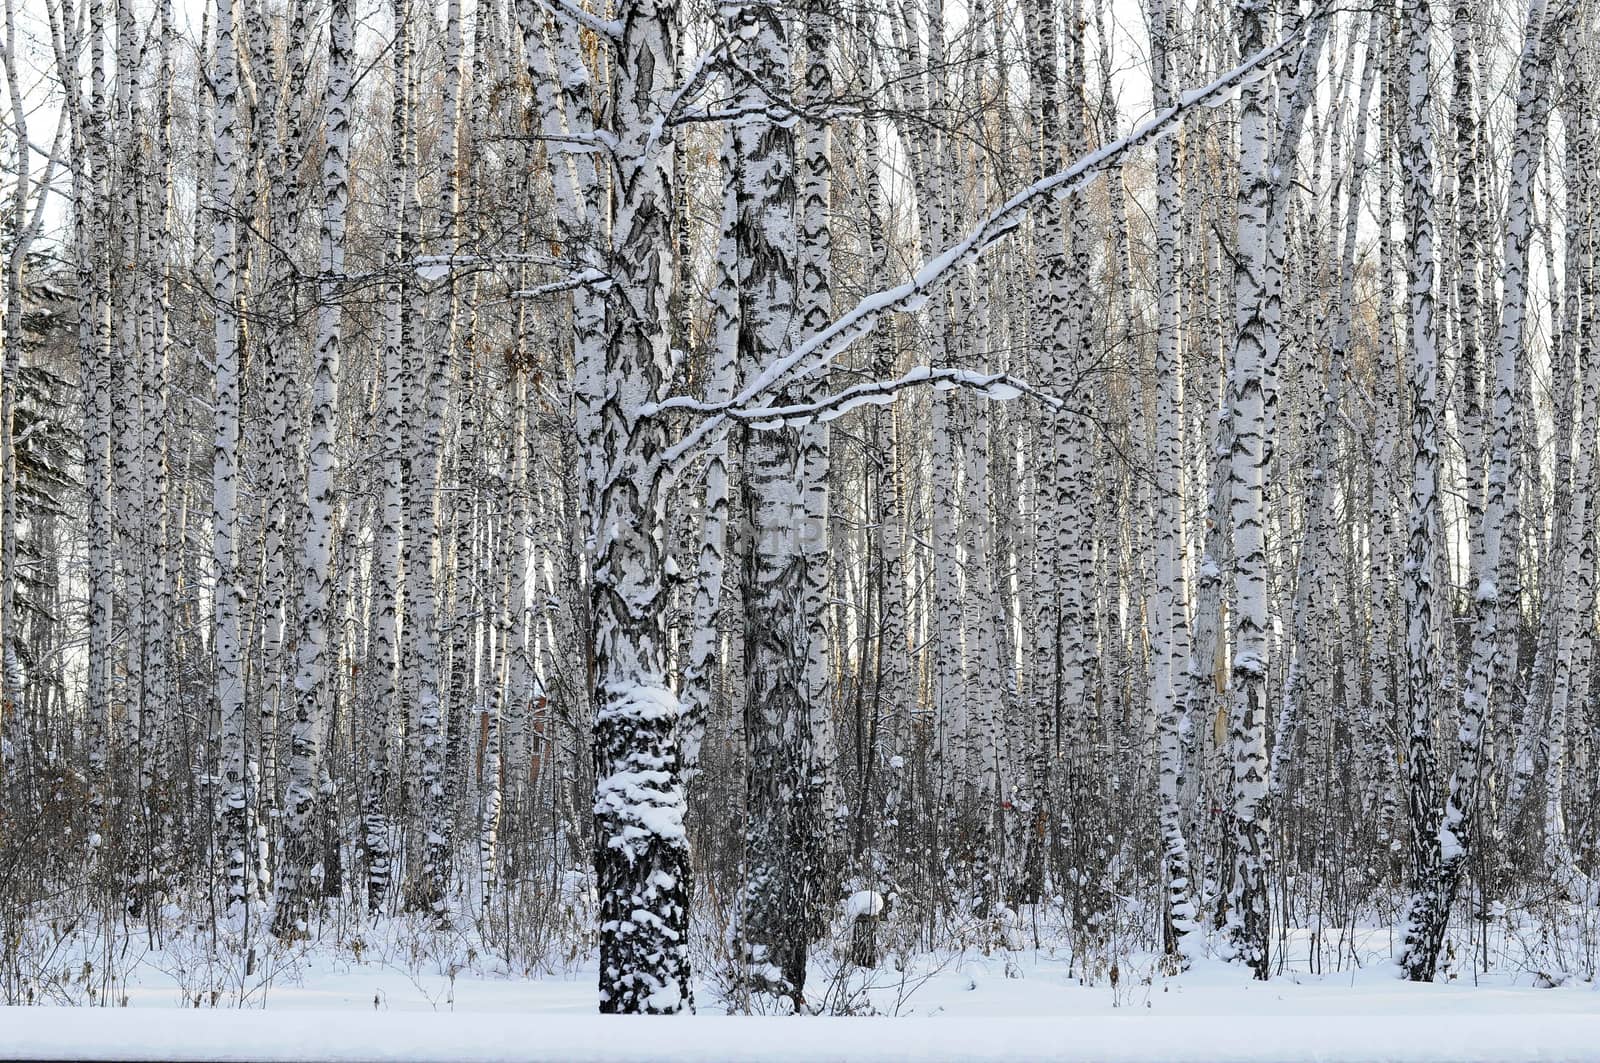 Birch wood in the winter. by veronka72